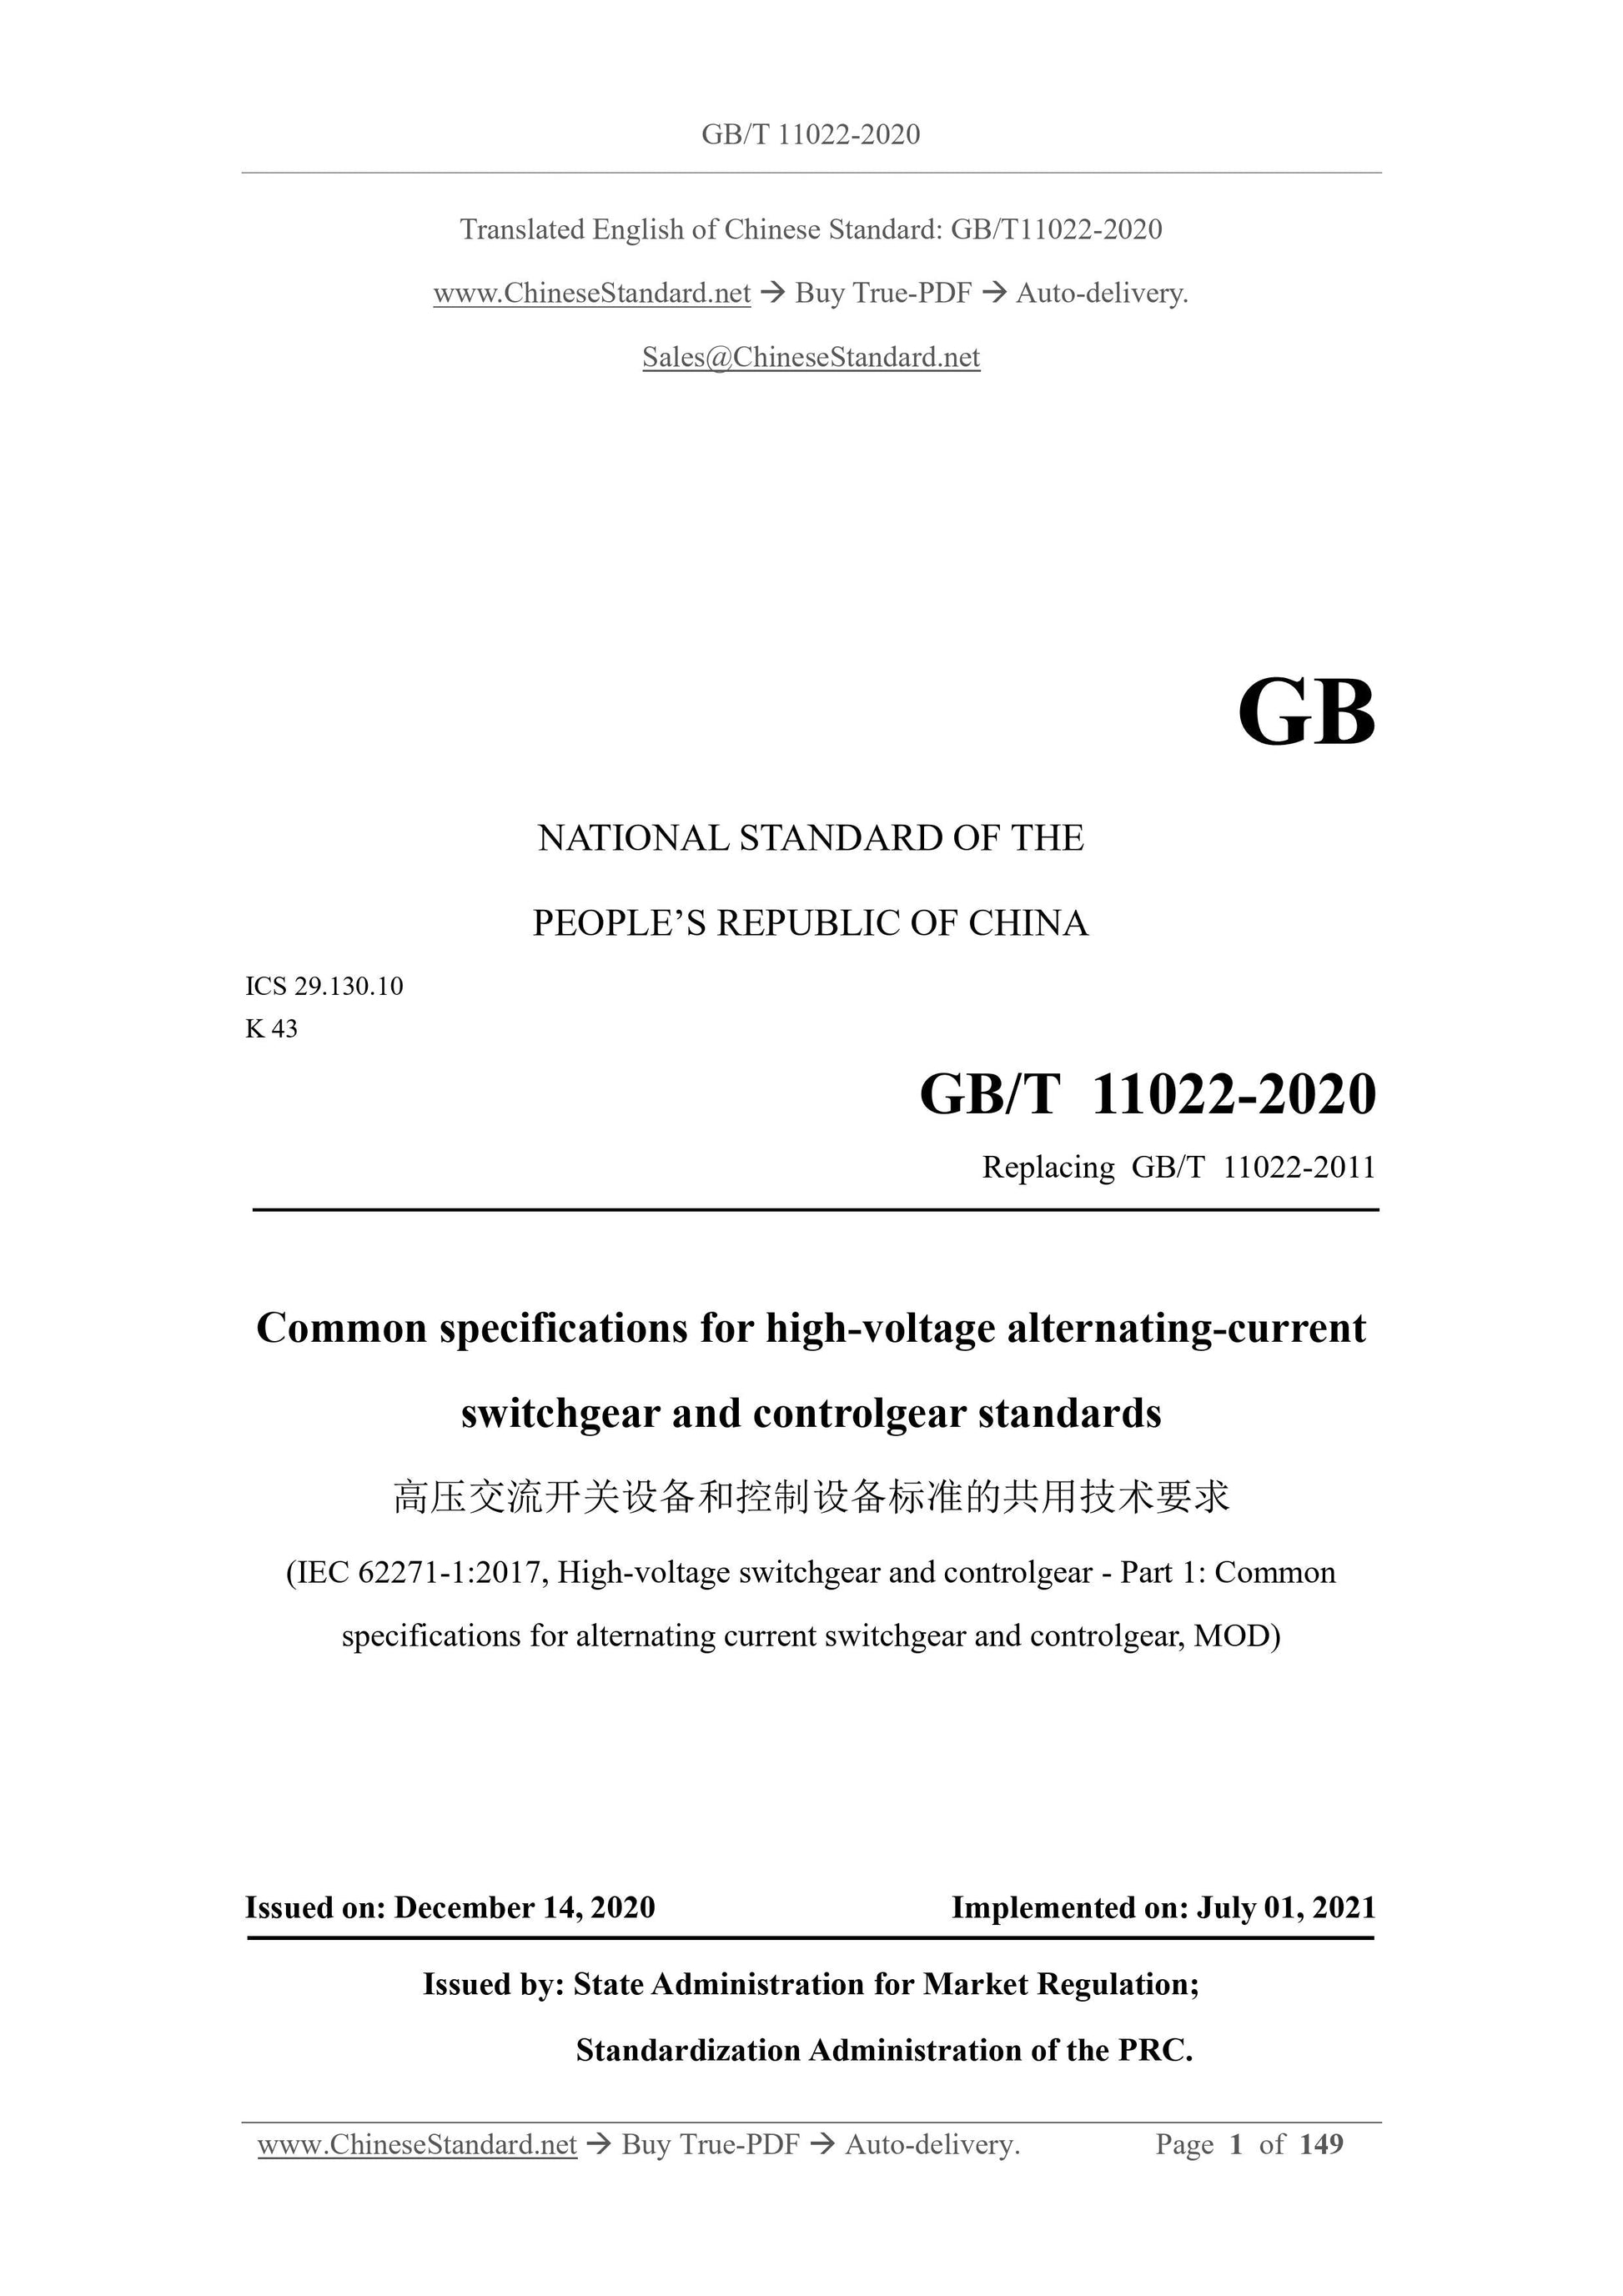 GB/T 11022-2020 Page 1